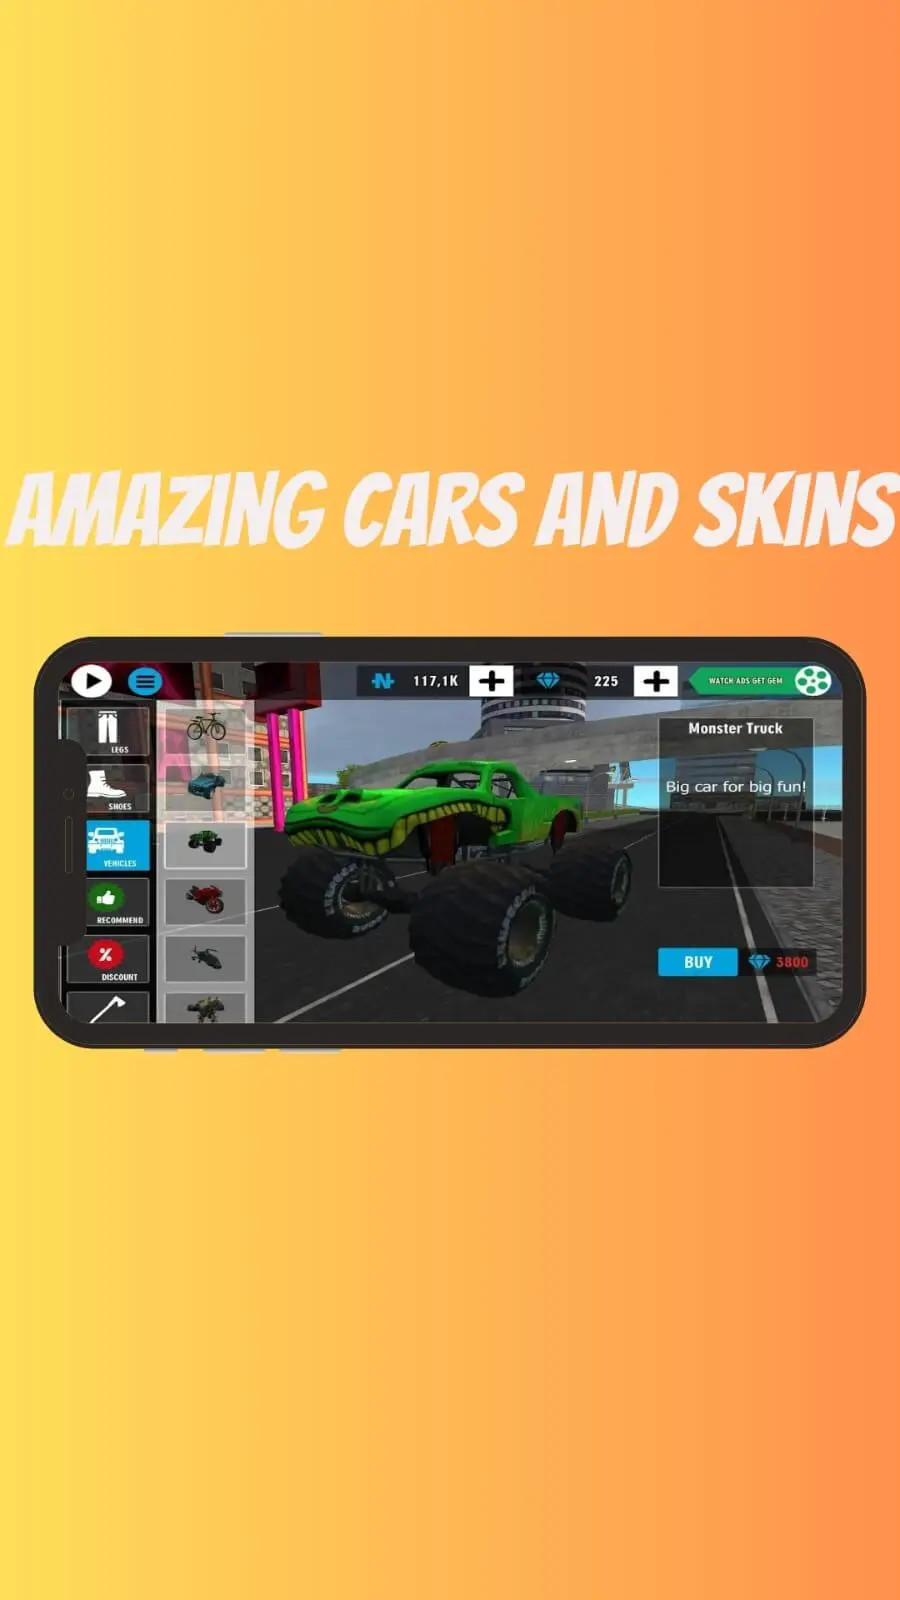 AMAZING CARS AND SKINS